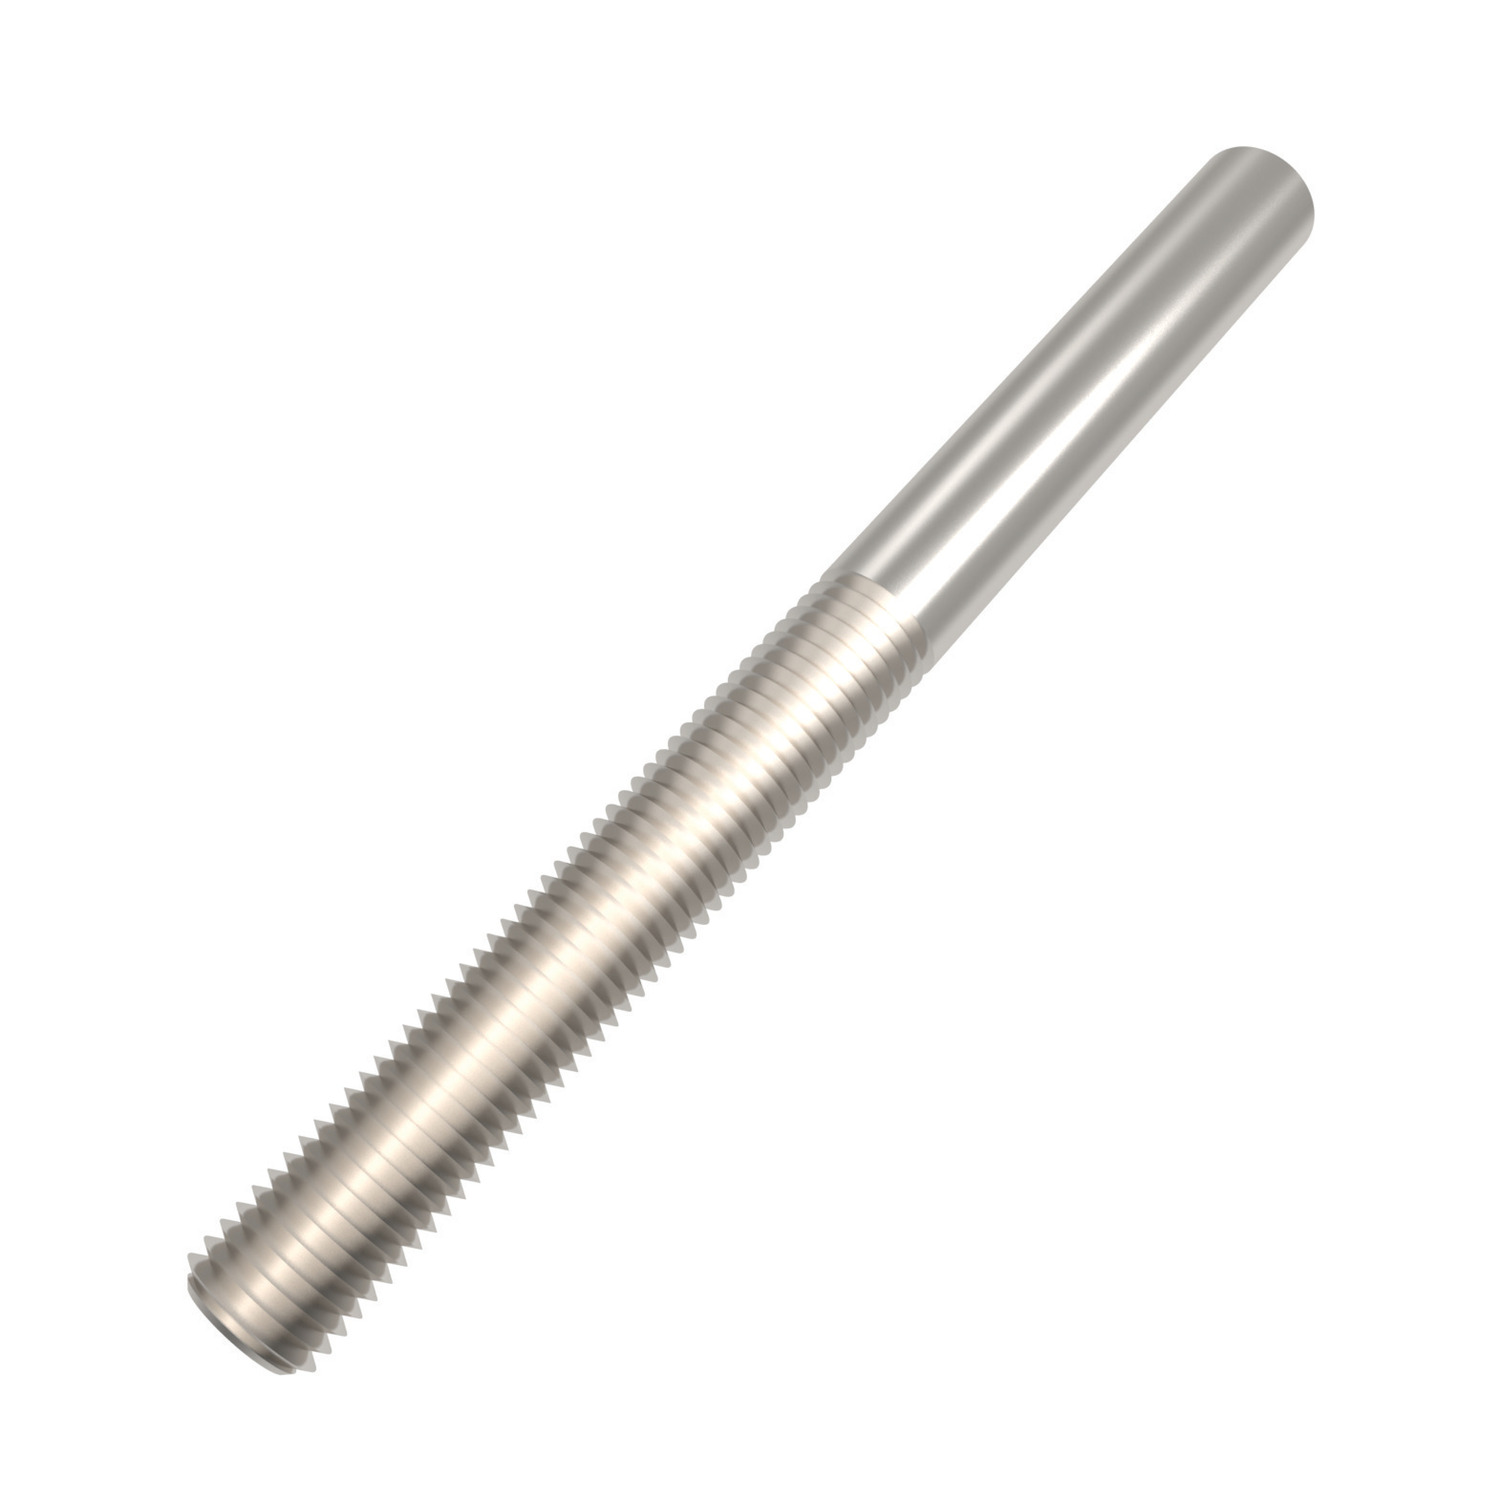 R3868.L006-A4 Welding Studs LH M6 A4 s/s Not to be used for lifting unless SWL marked.